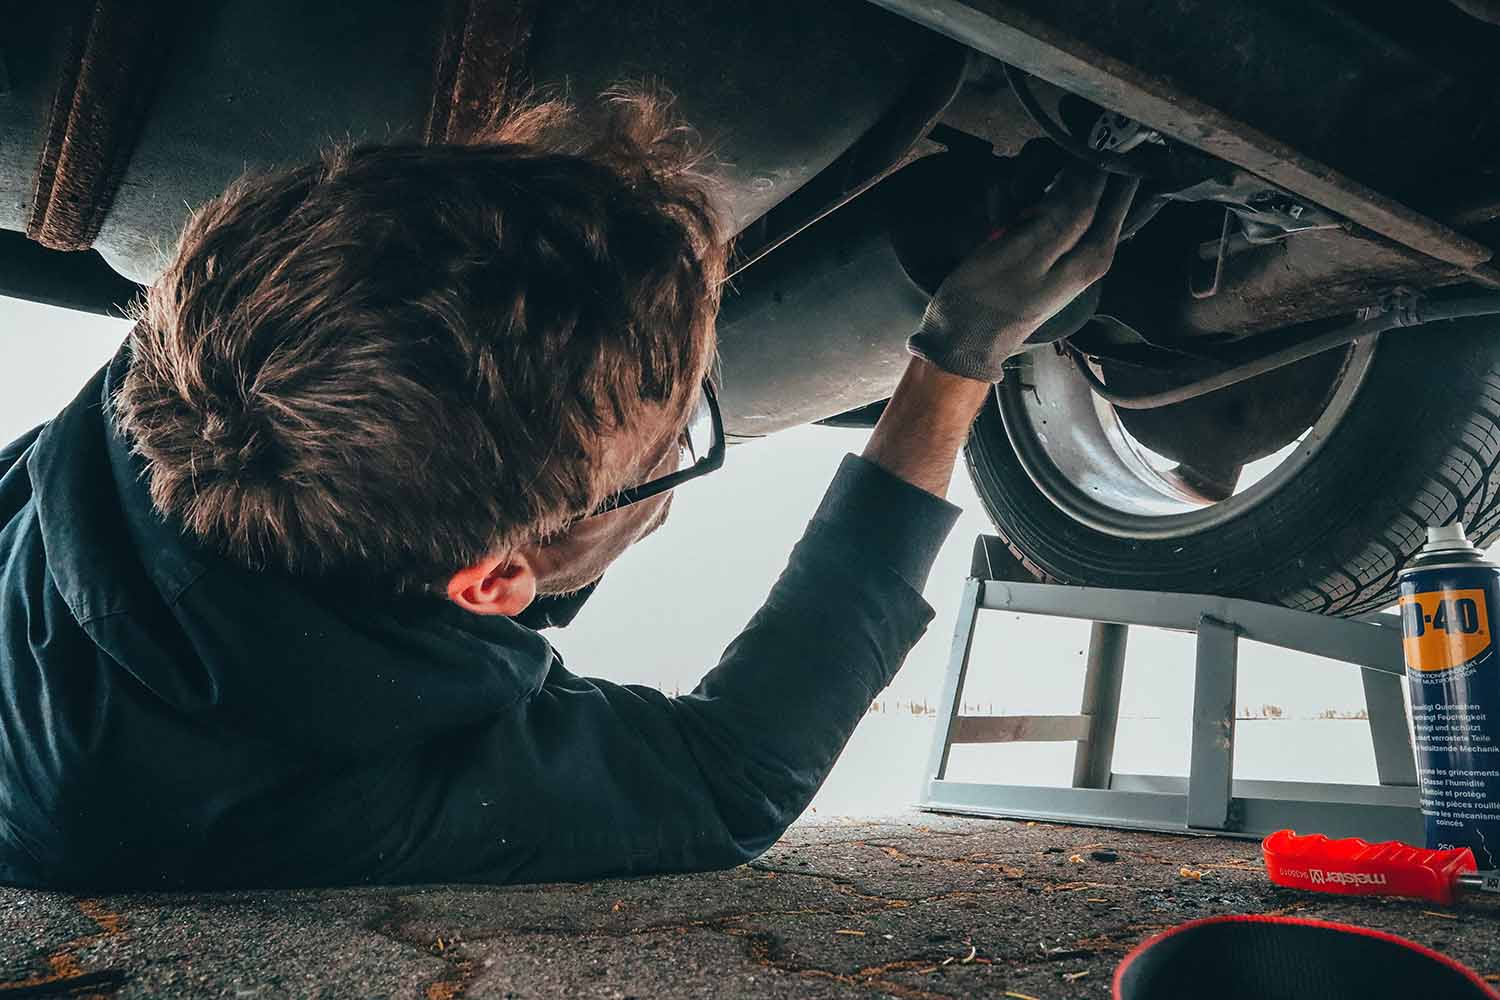 Mechanic performing maintenance on the underside of a vehicle